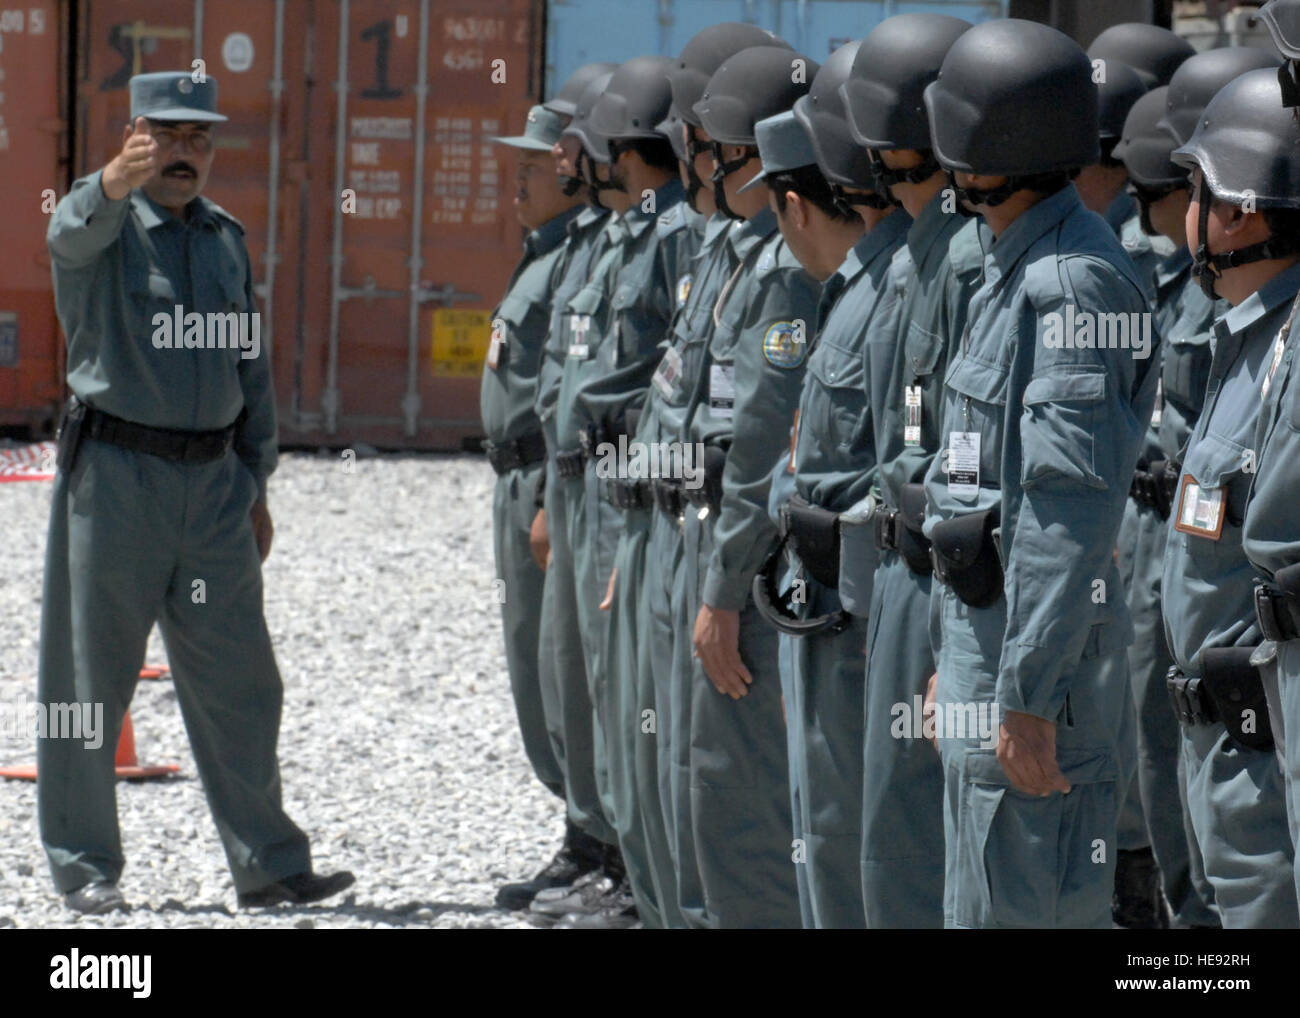 KABUL, Afghanistan (June 6, 2010) -- A group of Afghan National Civil Order Police trainees prepare to graduate from training to then be deployed to regions throughout Afghanistan. Brig. Gen. Carmelo Burgio, Combined Training Advisory Group-Police commander, spoke to the graduates and charged them with the duties of working hard and protecting the Afghan Nation's children.  Staff Sgt. Jeff Nevison) Stock Photo